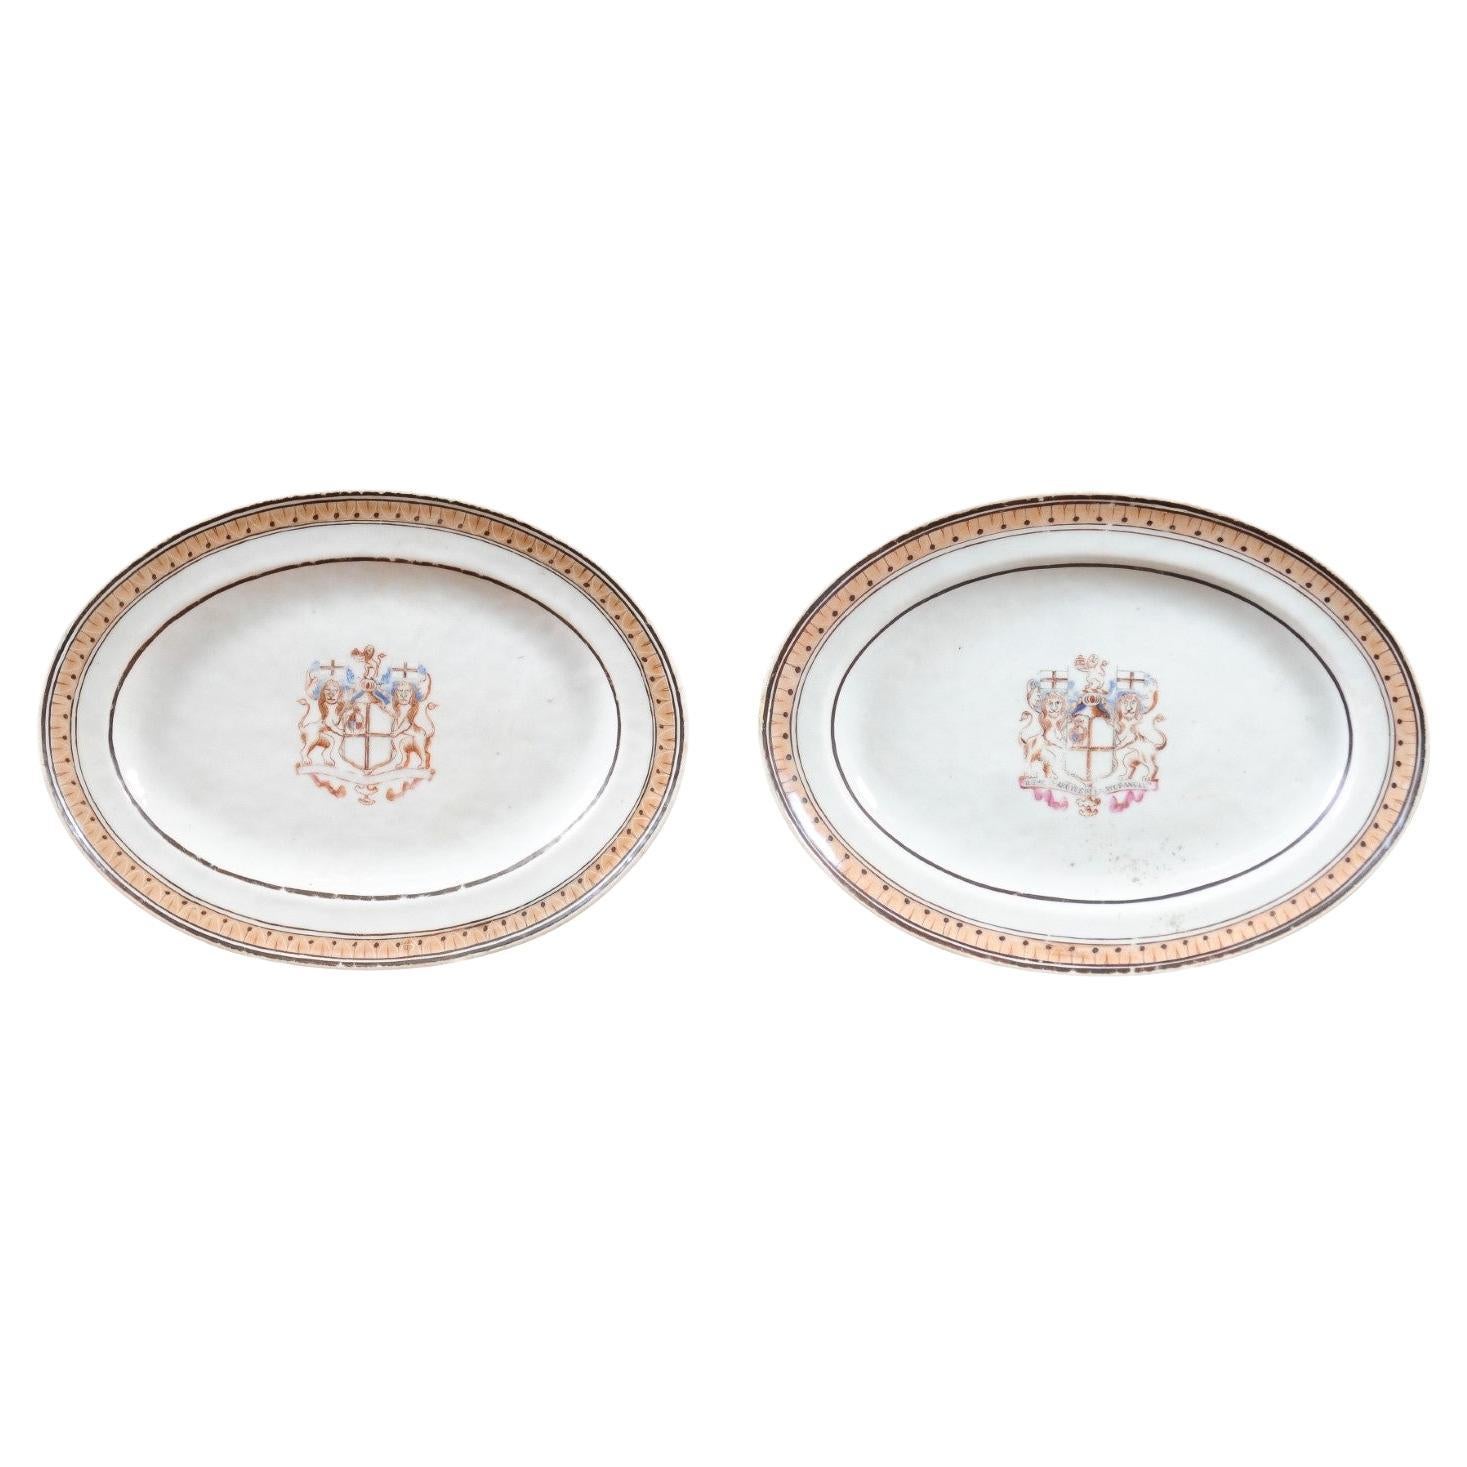 Pair of 18th Century Chinese Export Porcelain Platters with Armorial Crests For Sale